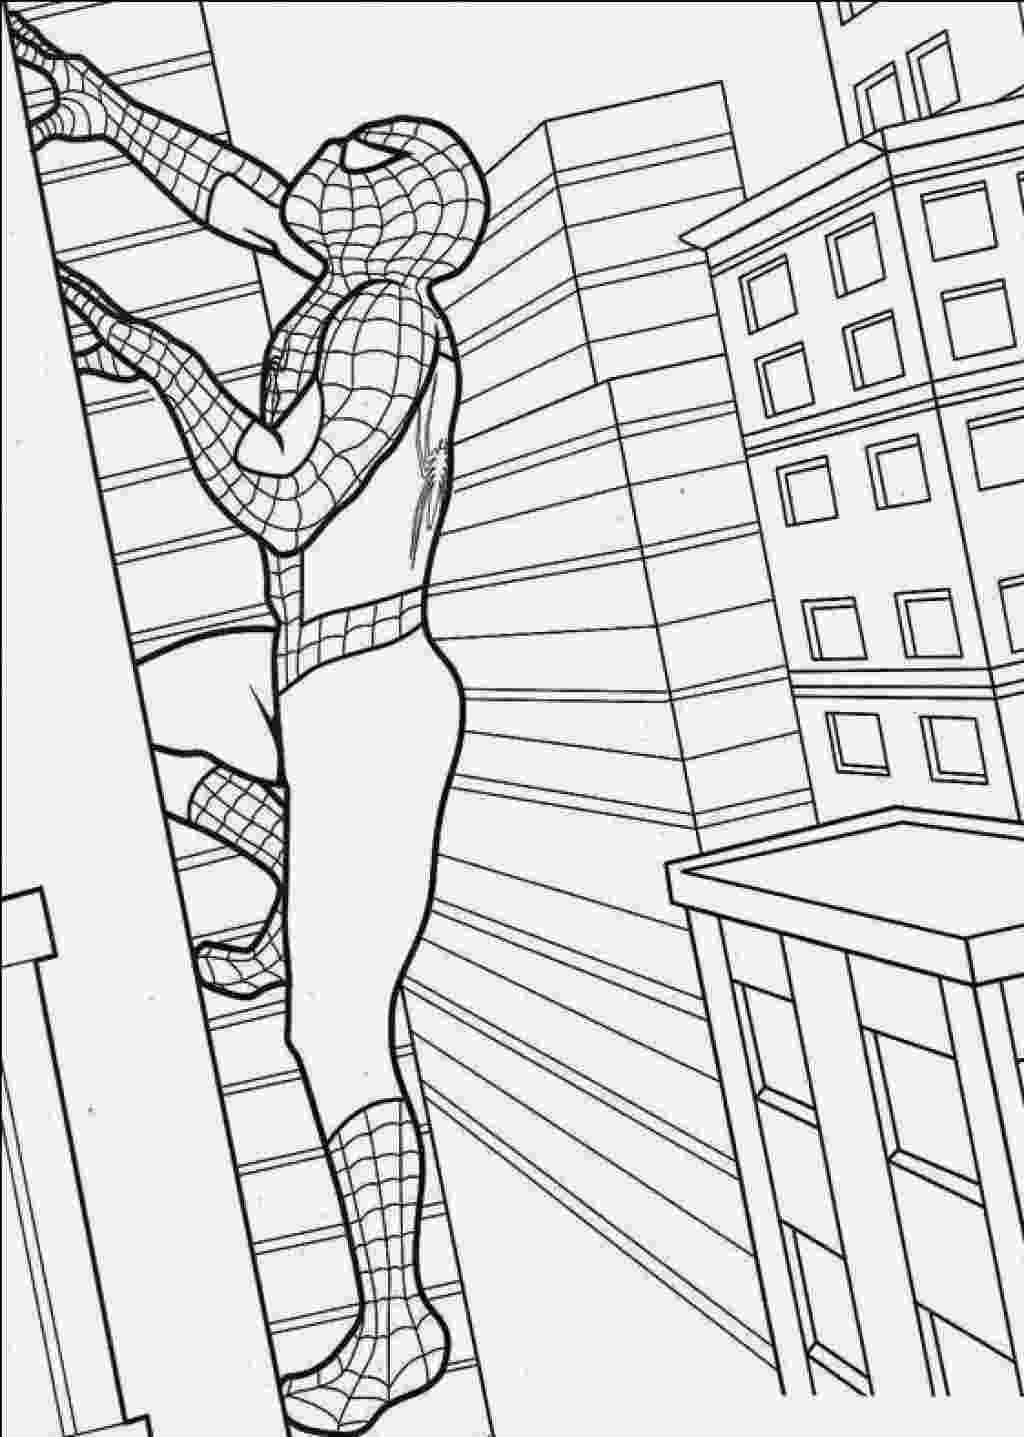 free printable spiderman coloring pages coloring pages spiderman free printable coloring pages coloring pages spiderman printable free 